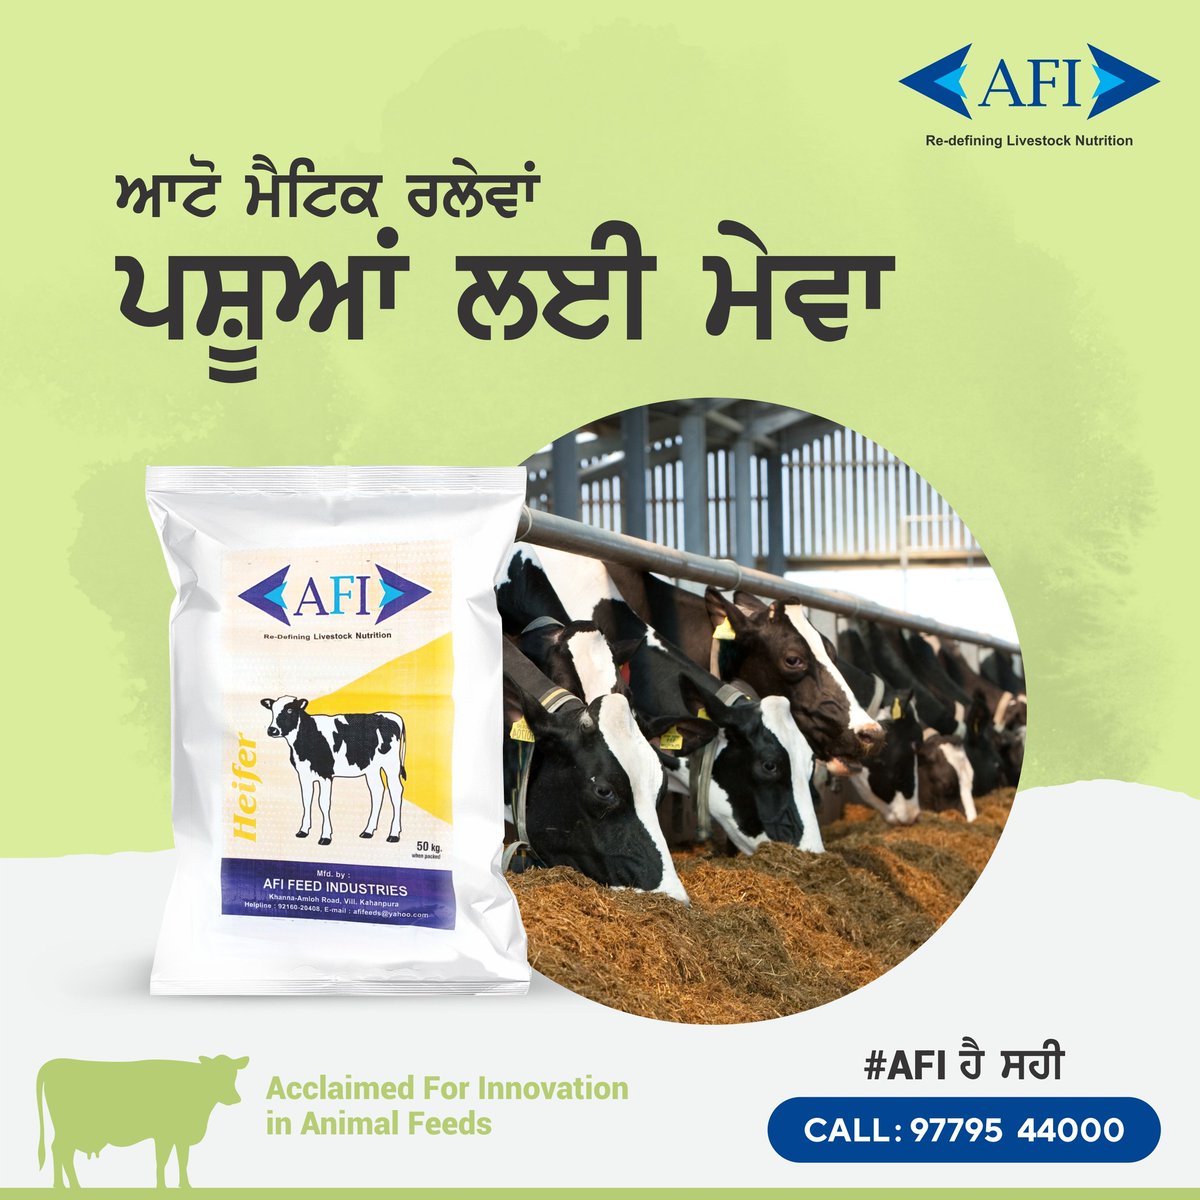 AFI, the feed that suits your own and your livestock's needs perfectly! For more details, Call: 09779544000 #TheFreshPeriod #Dairy #Feed #AnimalFeed #AnimalHealth #MilkProduction #AnimalNutrition #Farming #IndianDairyFarmer #DairyIndustry #DairyFarmer #DairyFarming #Milk